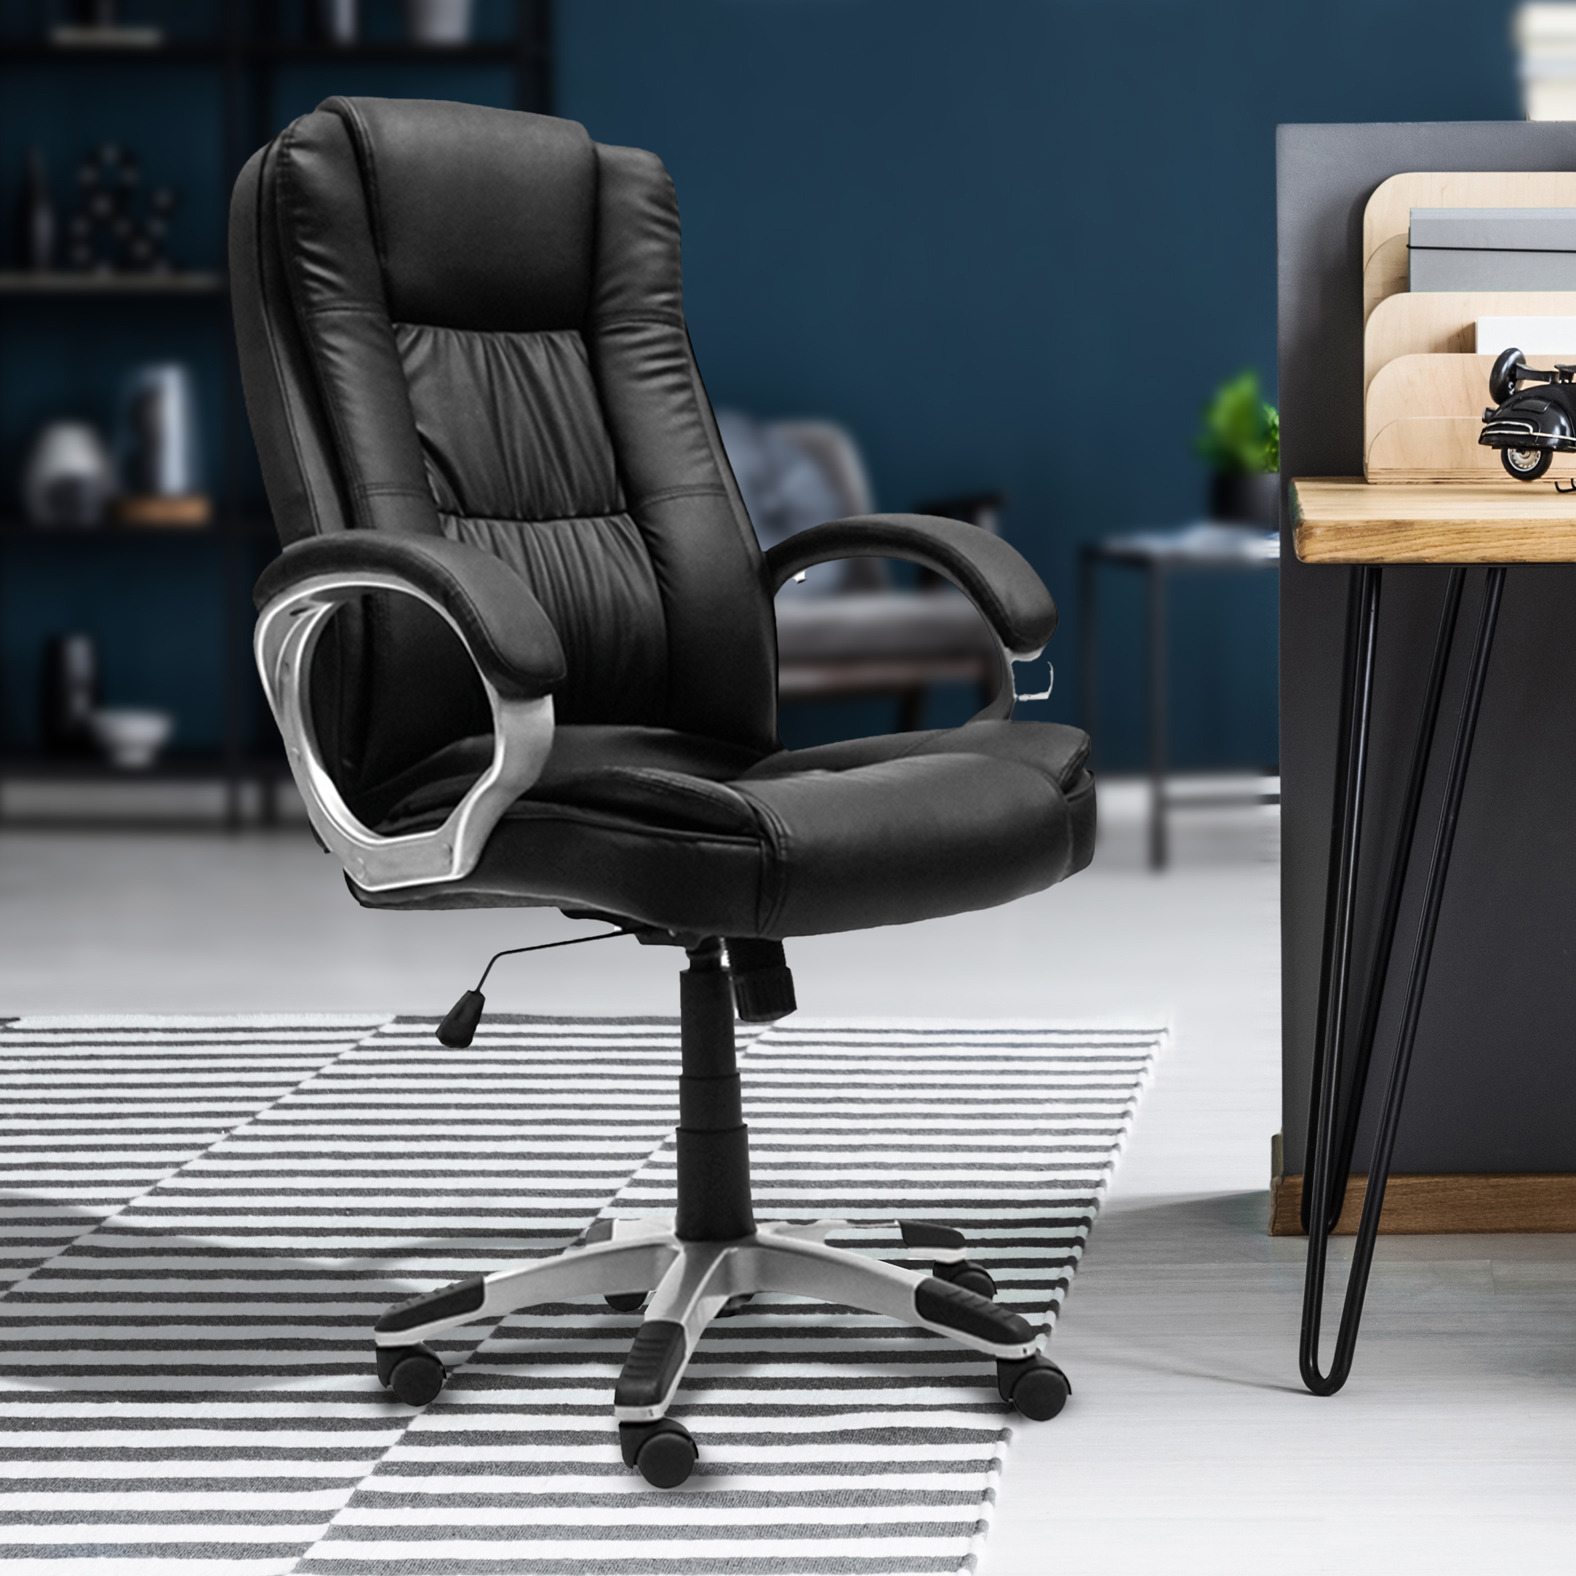 20% off on Padded Office Chair | OneDayOnly